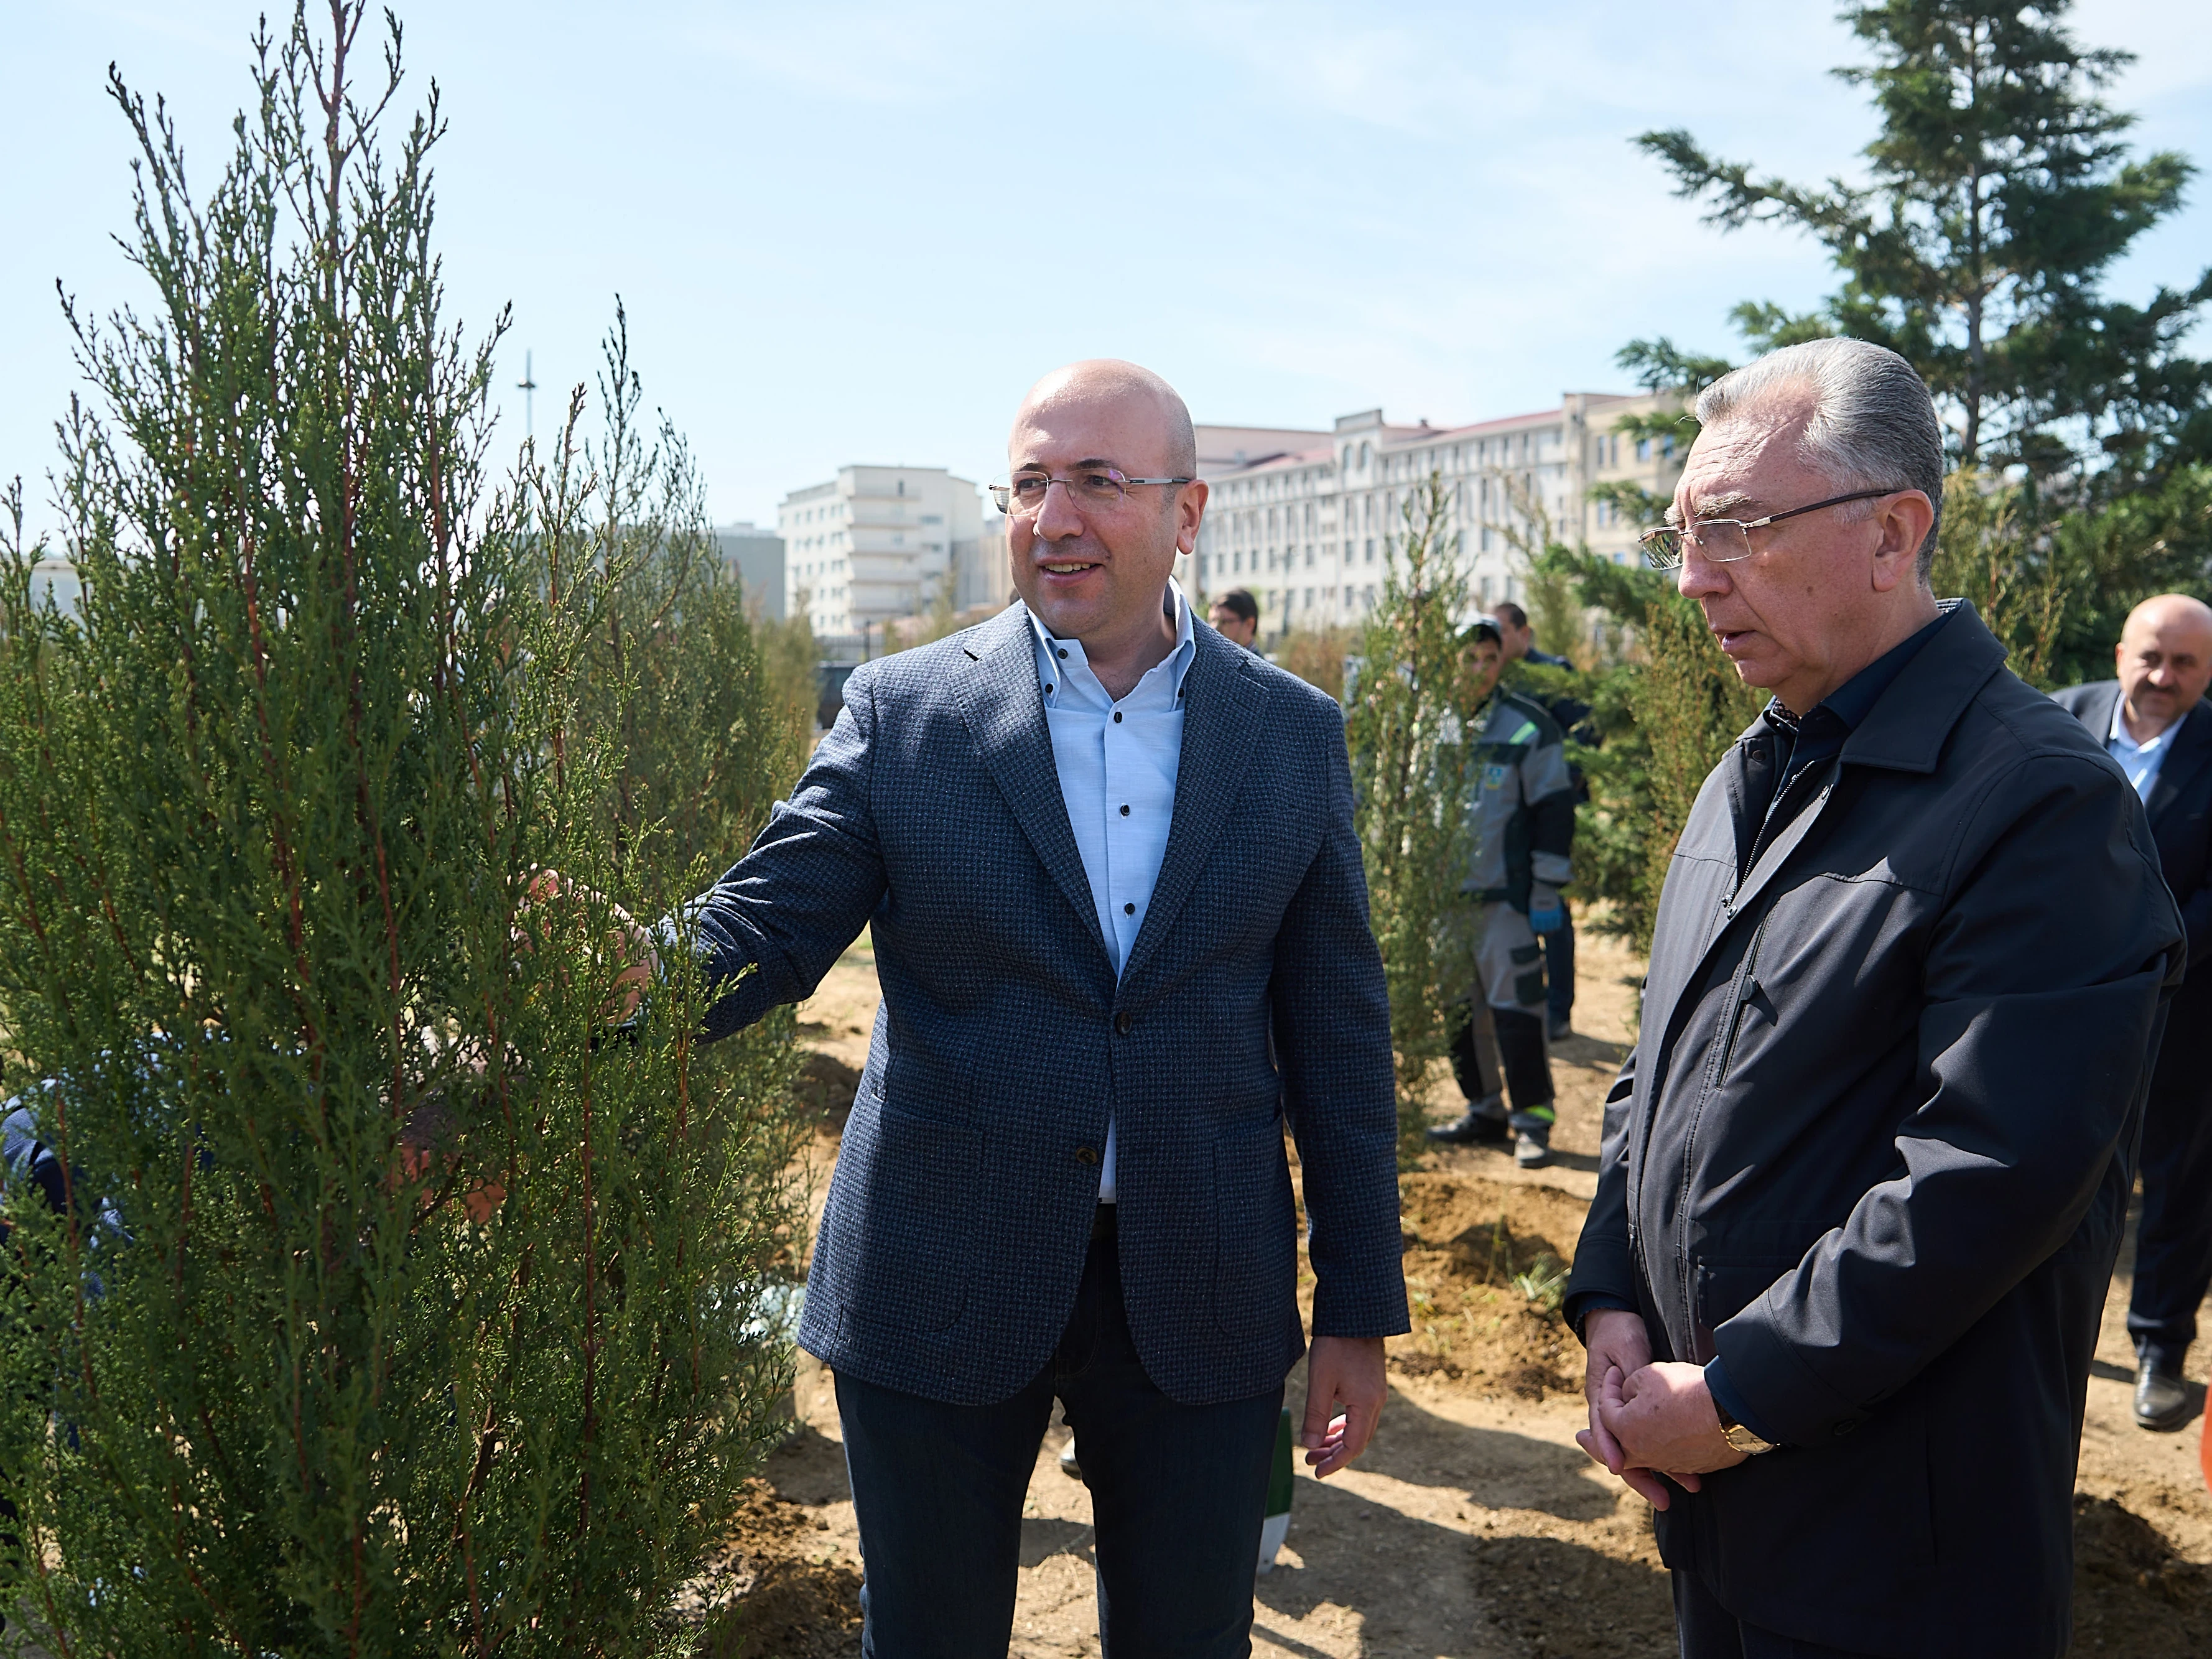 On the occasion of the 100th anniversary of the birth of the National Leader, a tree planting campaign was held in Baku